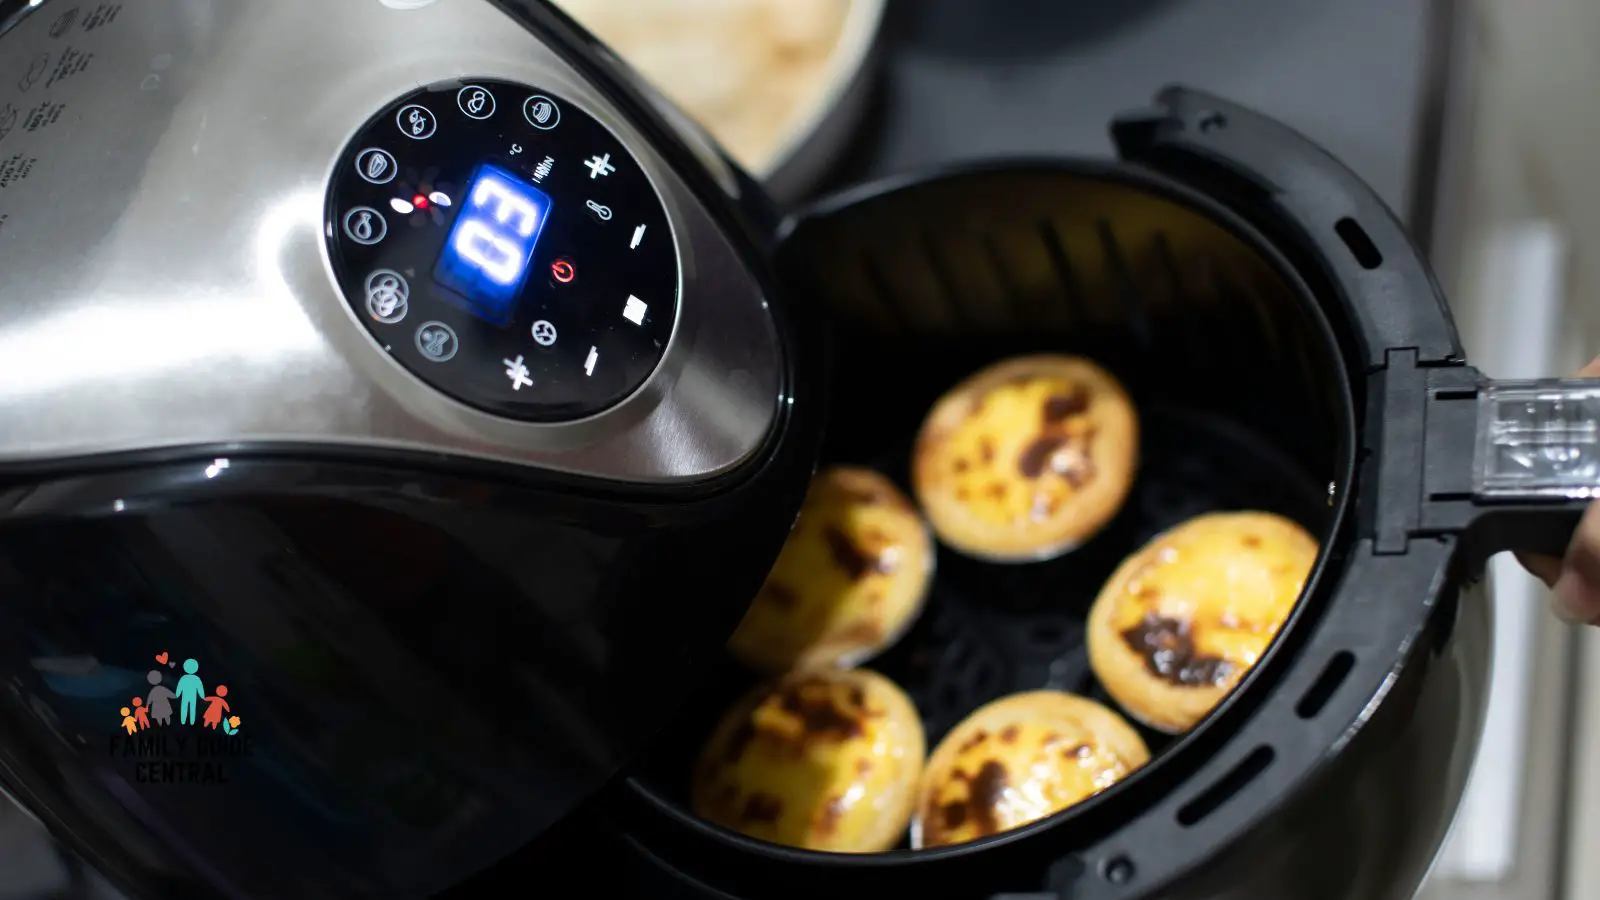 Air fryer opening up to either roasting or broiling - familyguidecentral.com